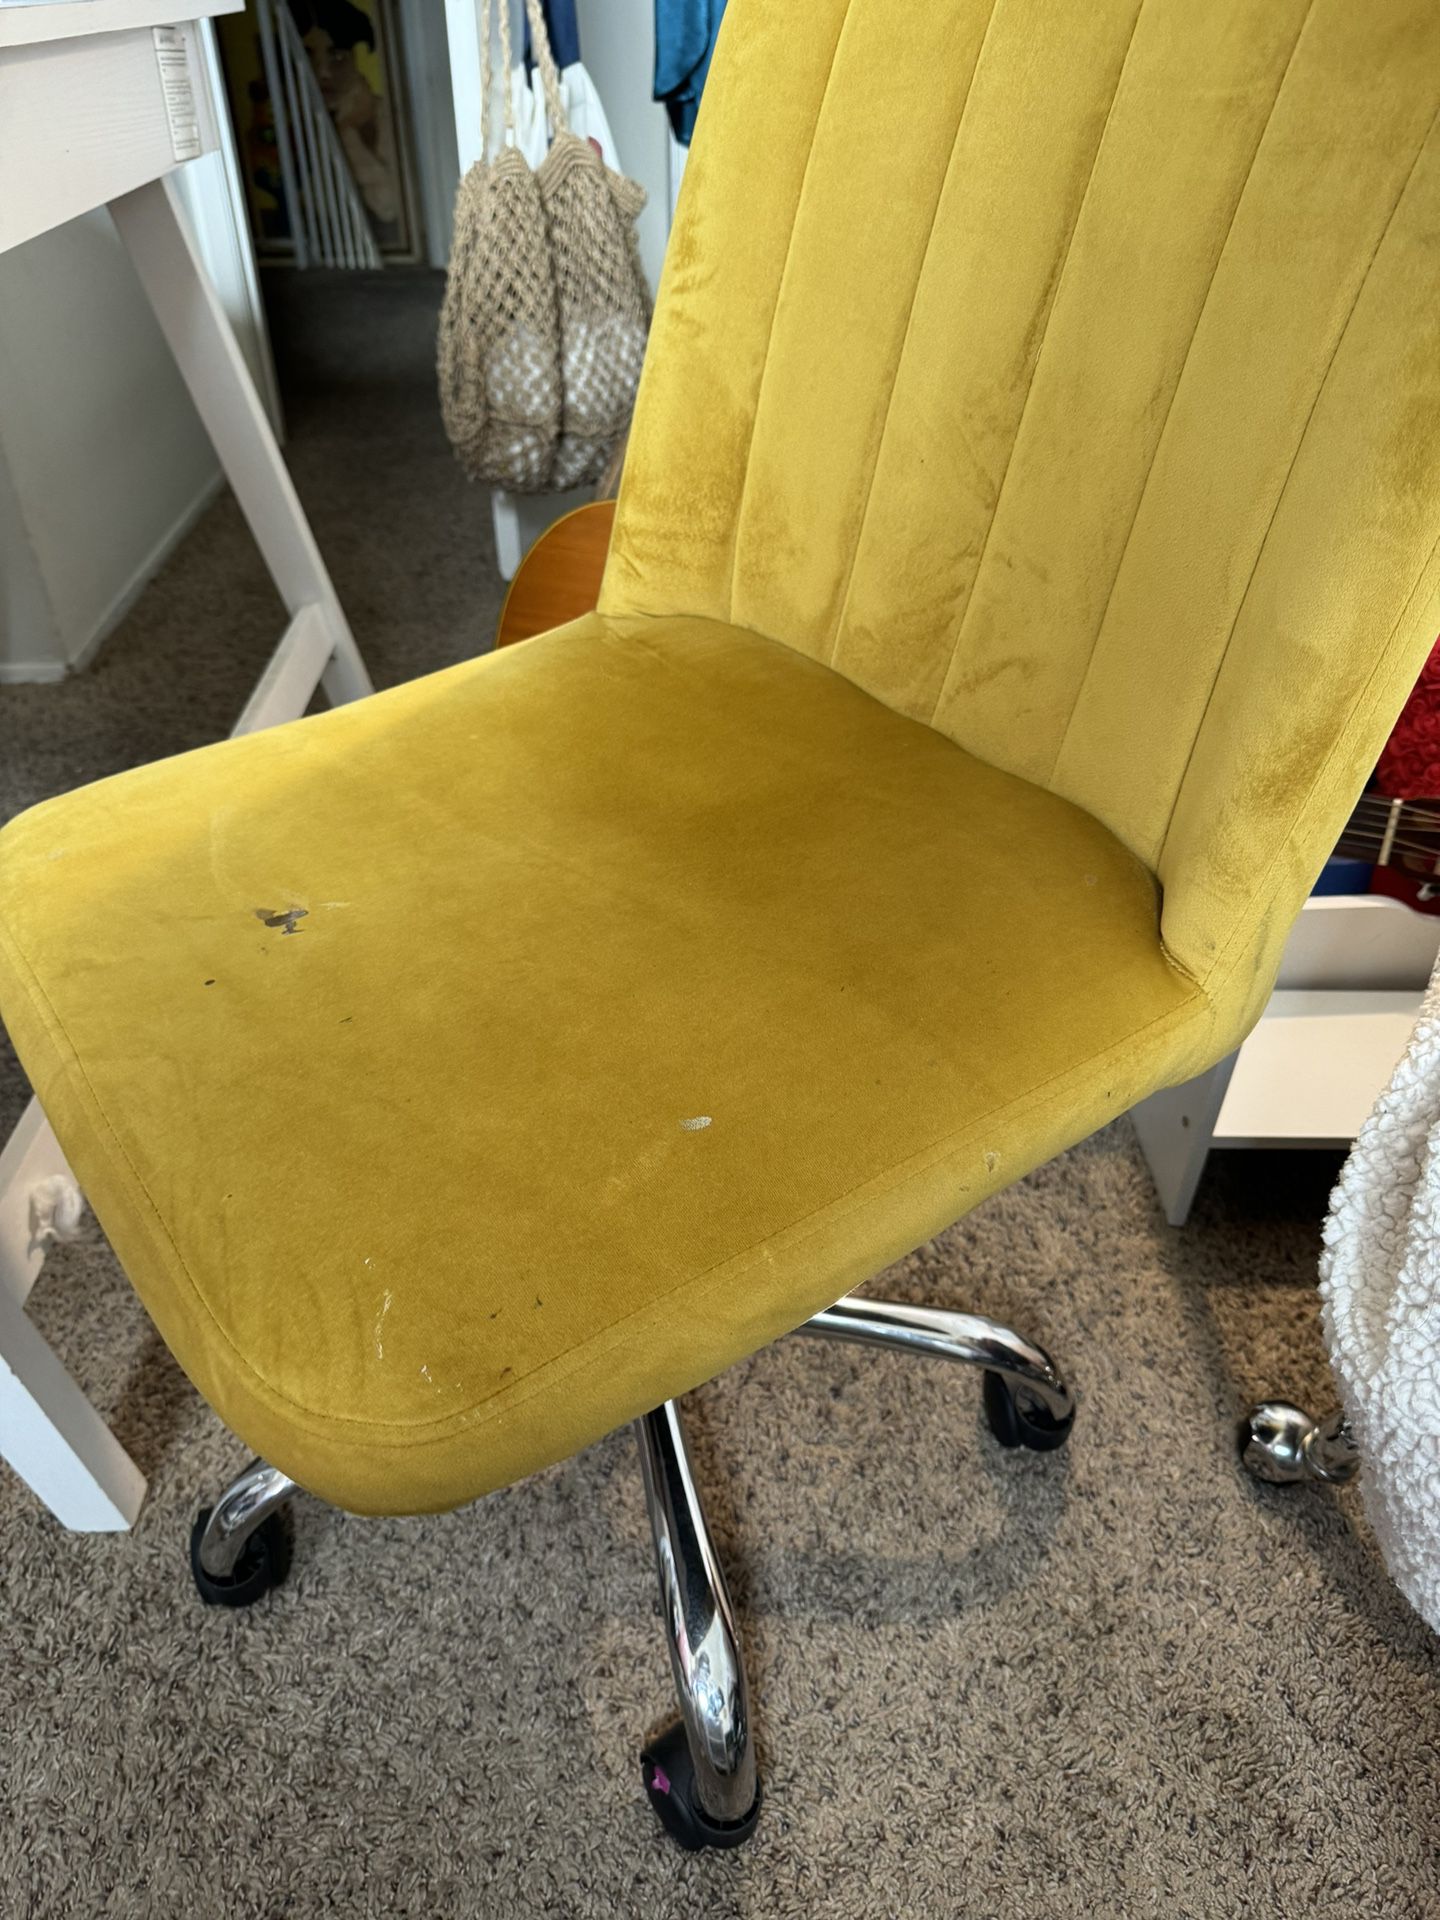 Yellow soft spinning chair